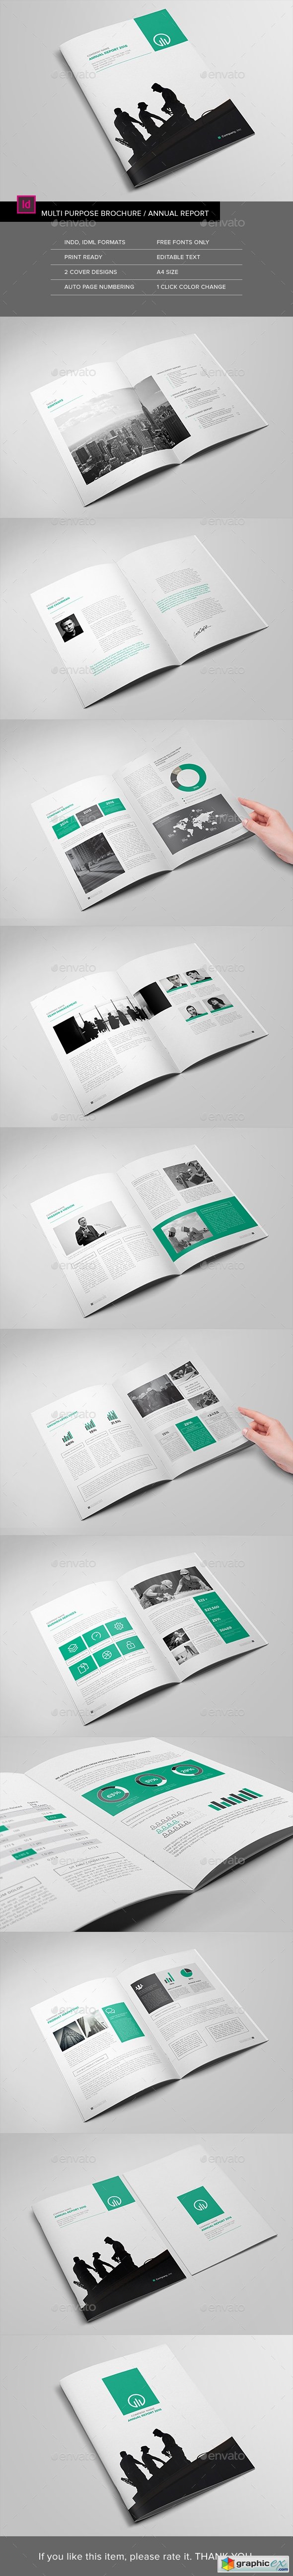 The Brochure / The Annual Report